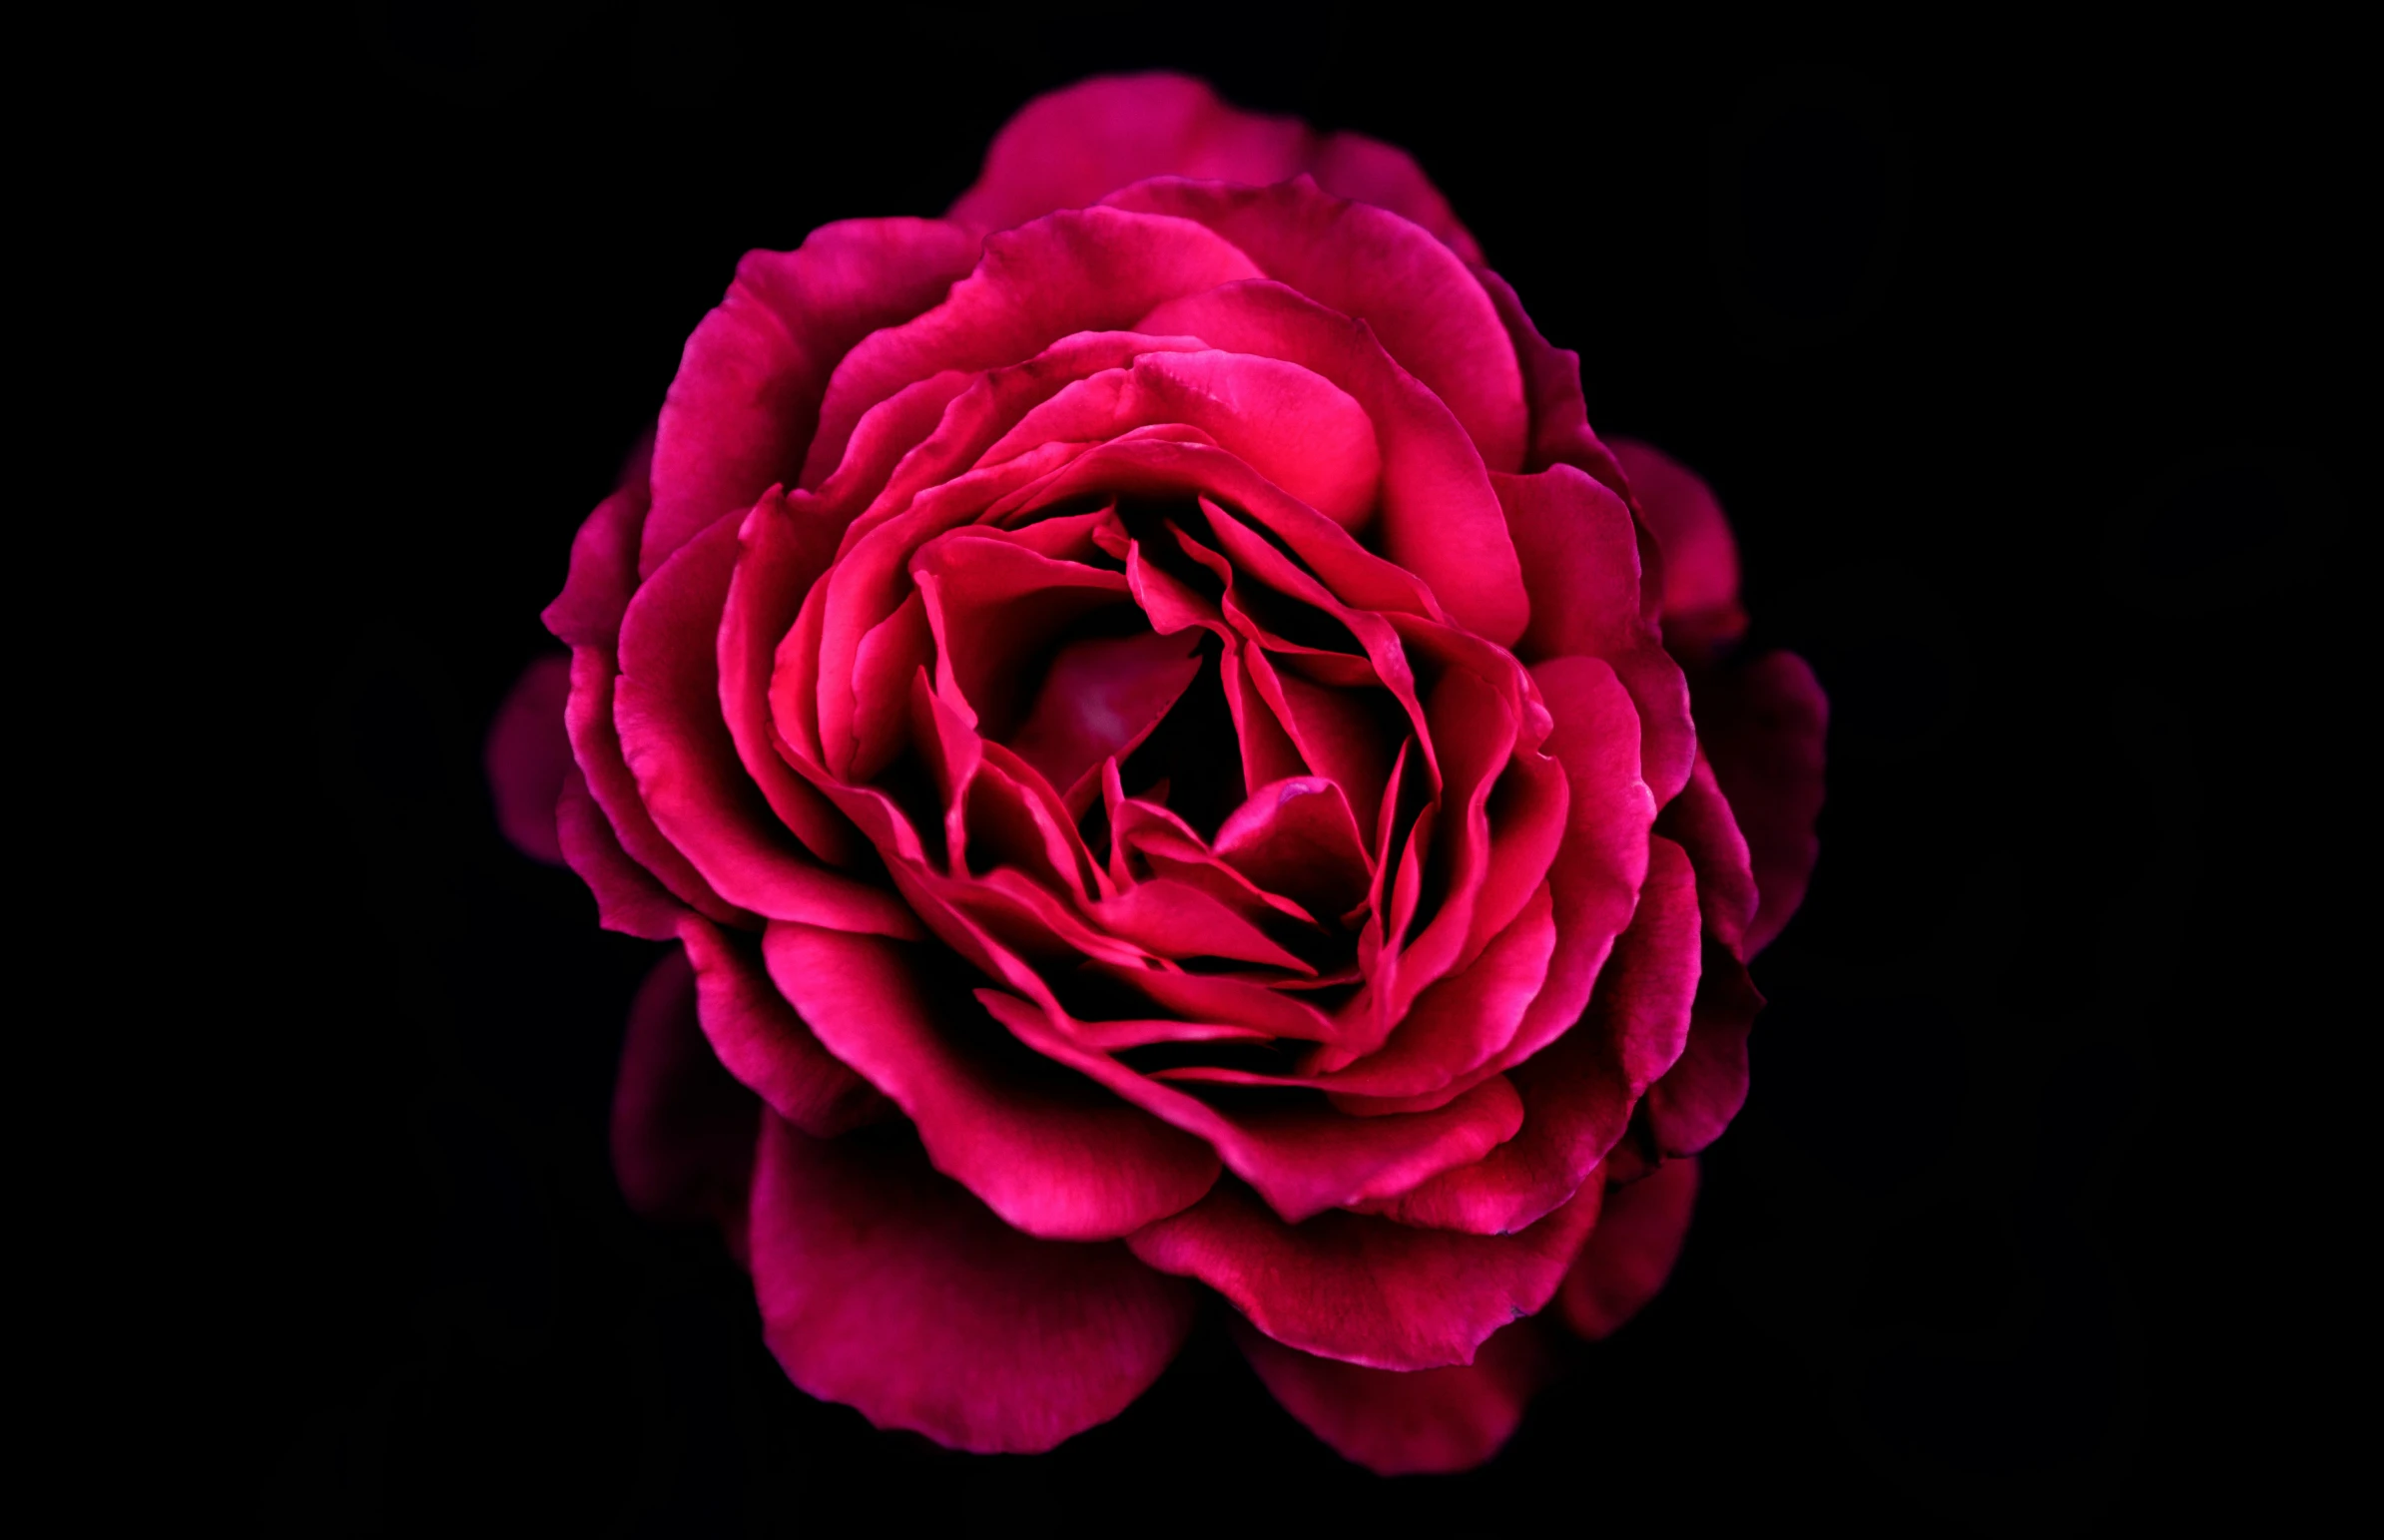 a large red rose on a black background